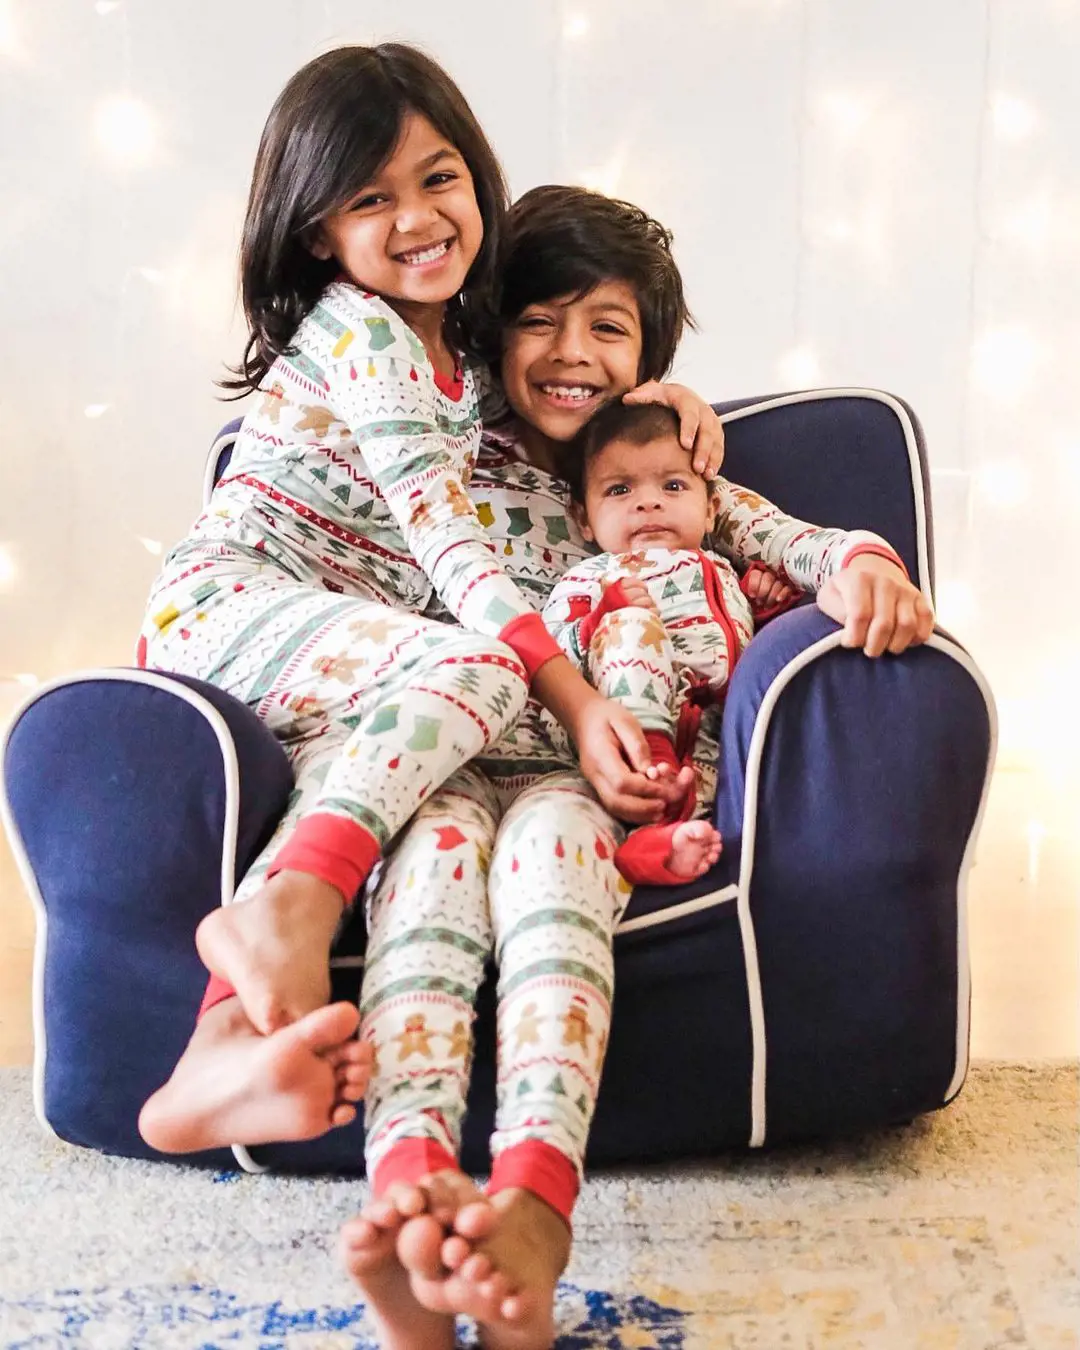 Arian and Shea show their love for their sister Zadie as they are photographed in their Christmas pyjamas